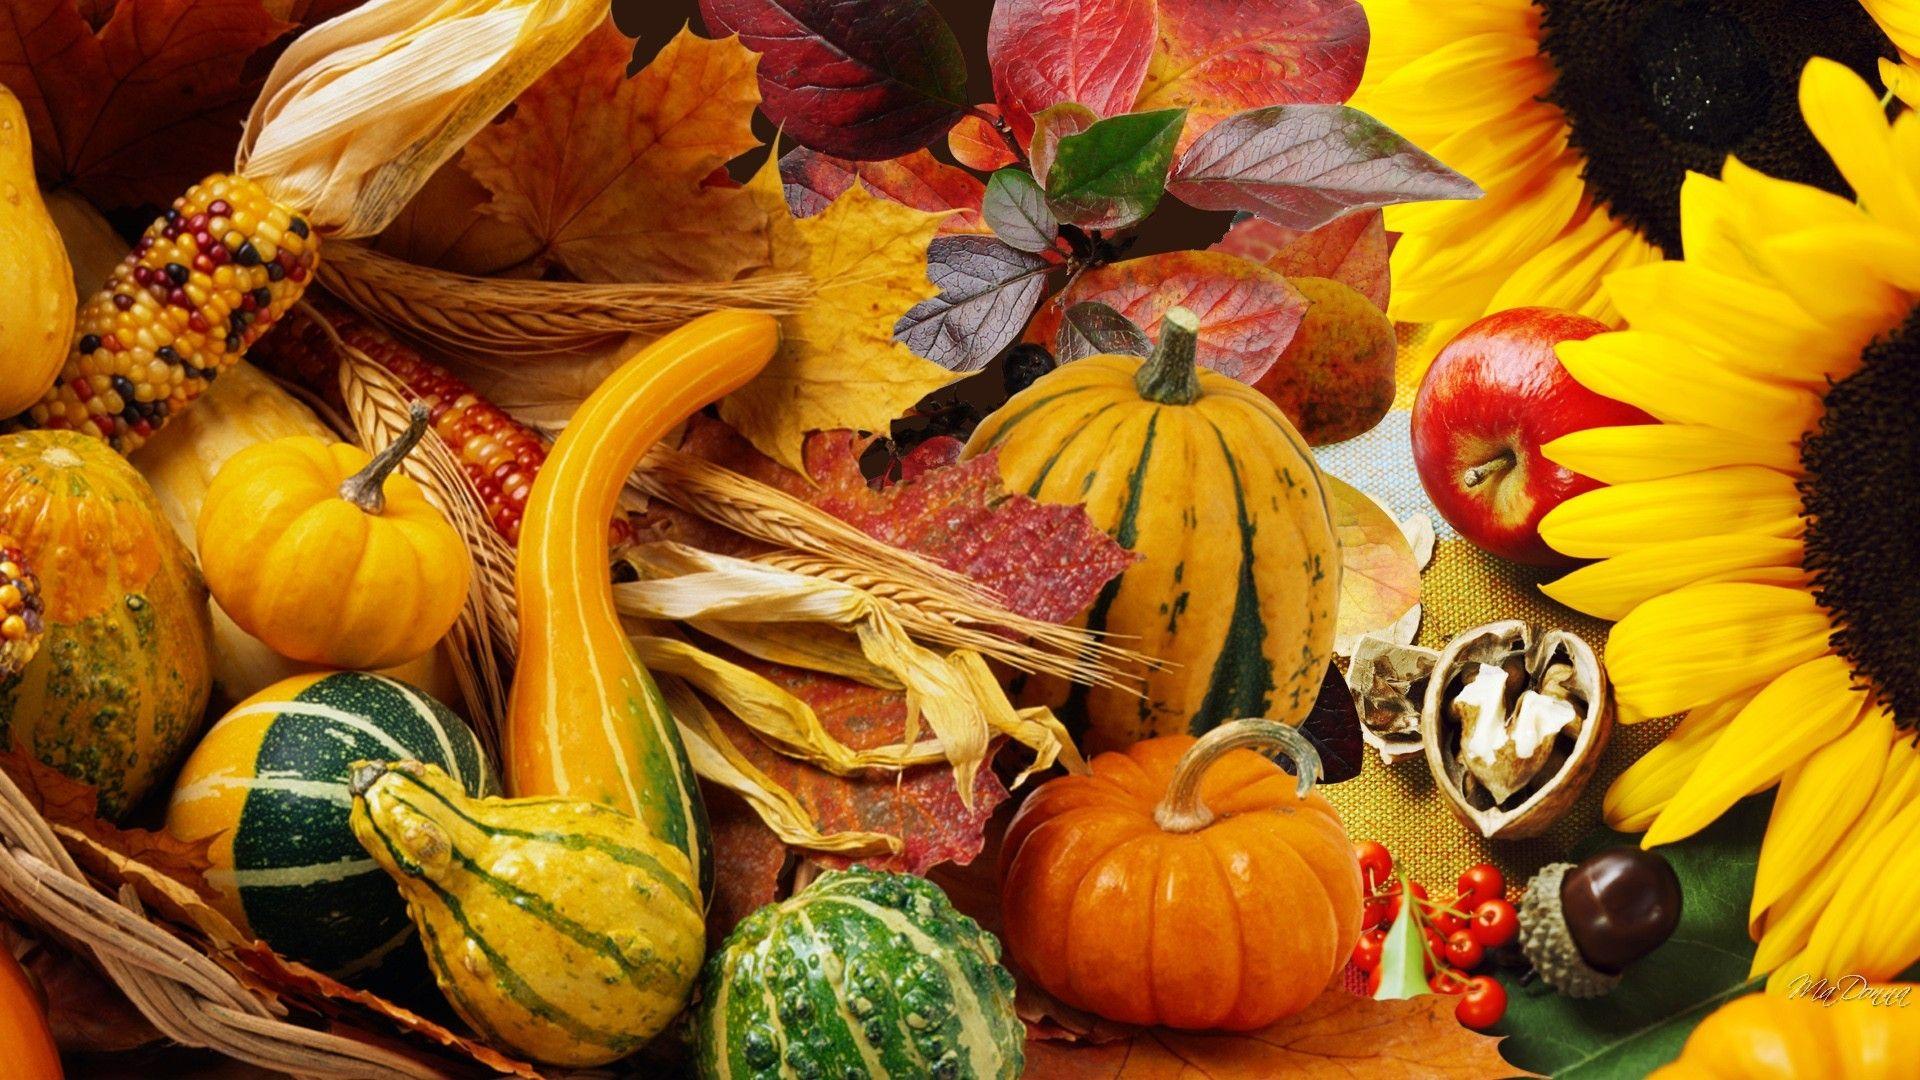 Gourds Tag wallpaper: Squash Leaves Harvest Vegetables Fall